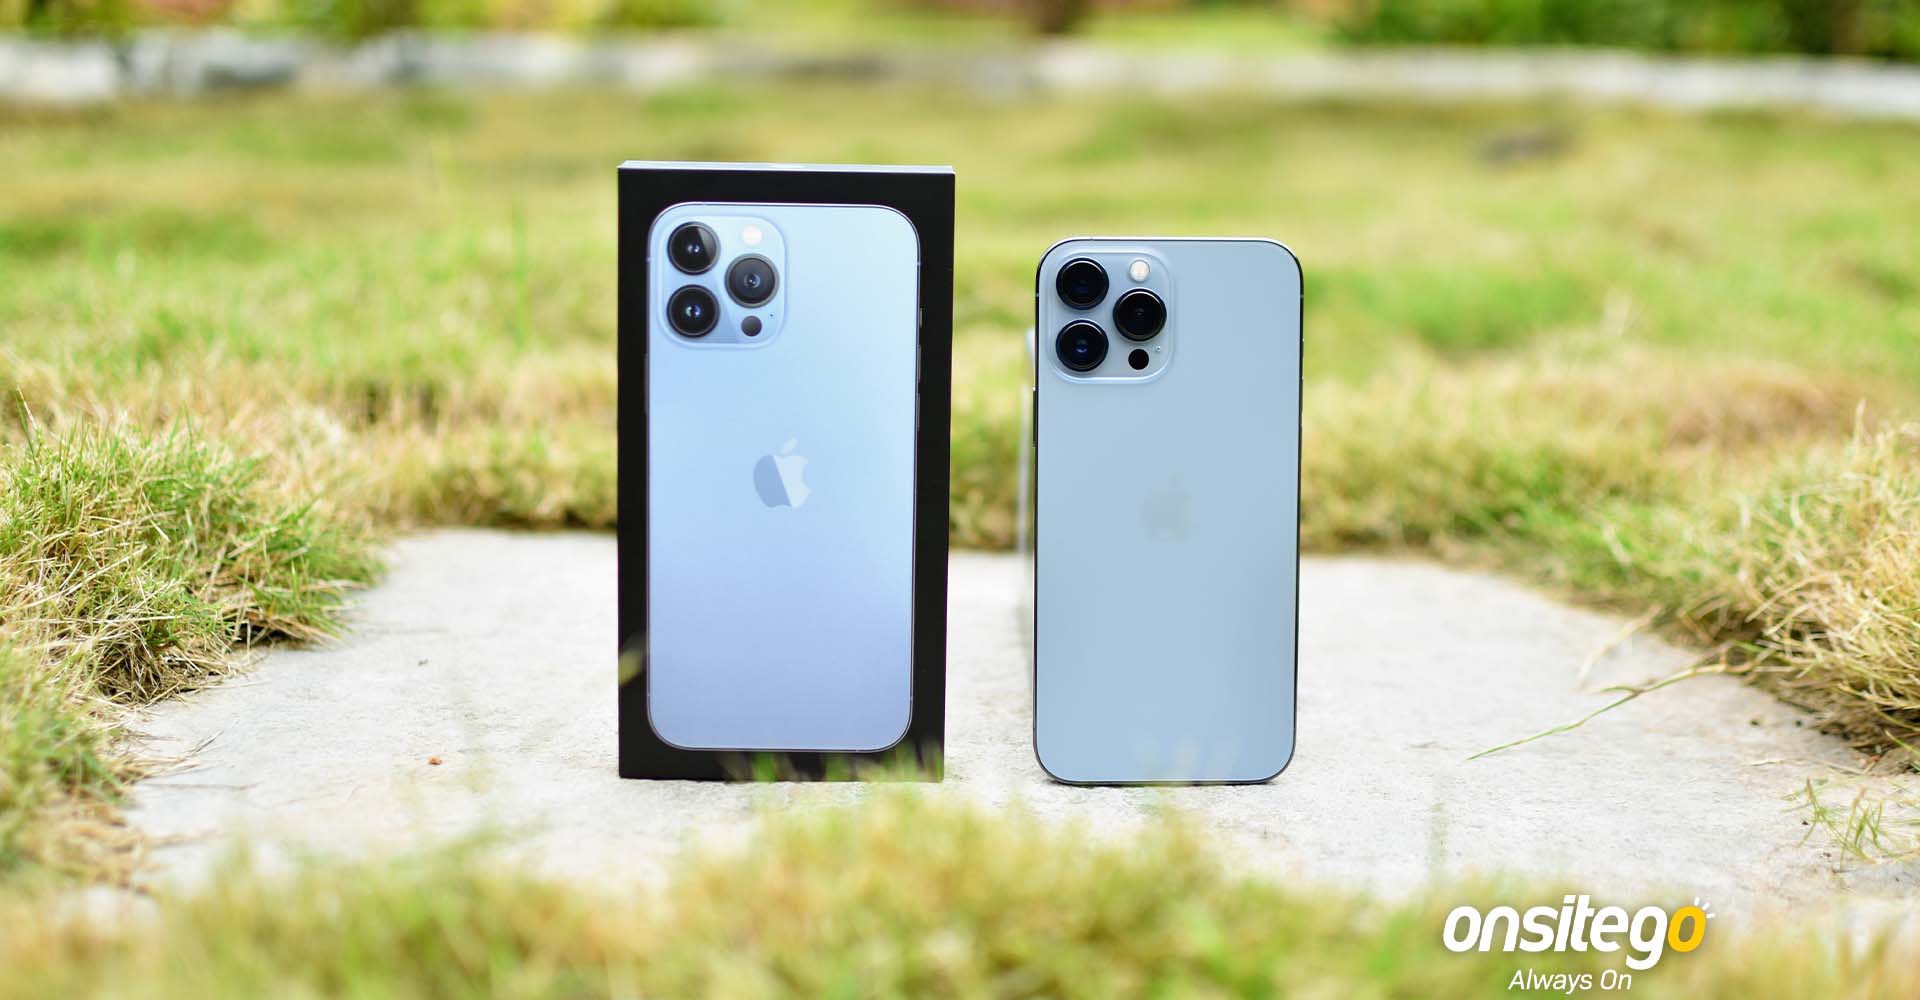 Apple iPhone 13 Pro and Pro Max Review: The Best iPhones Yet